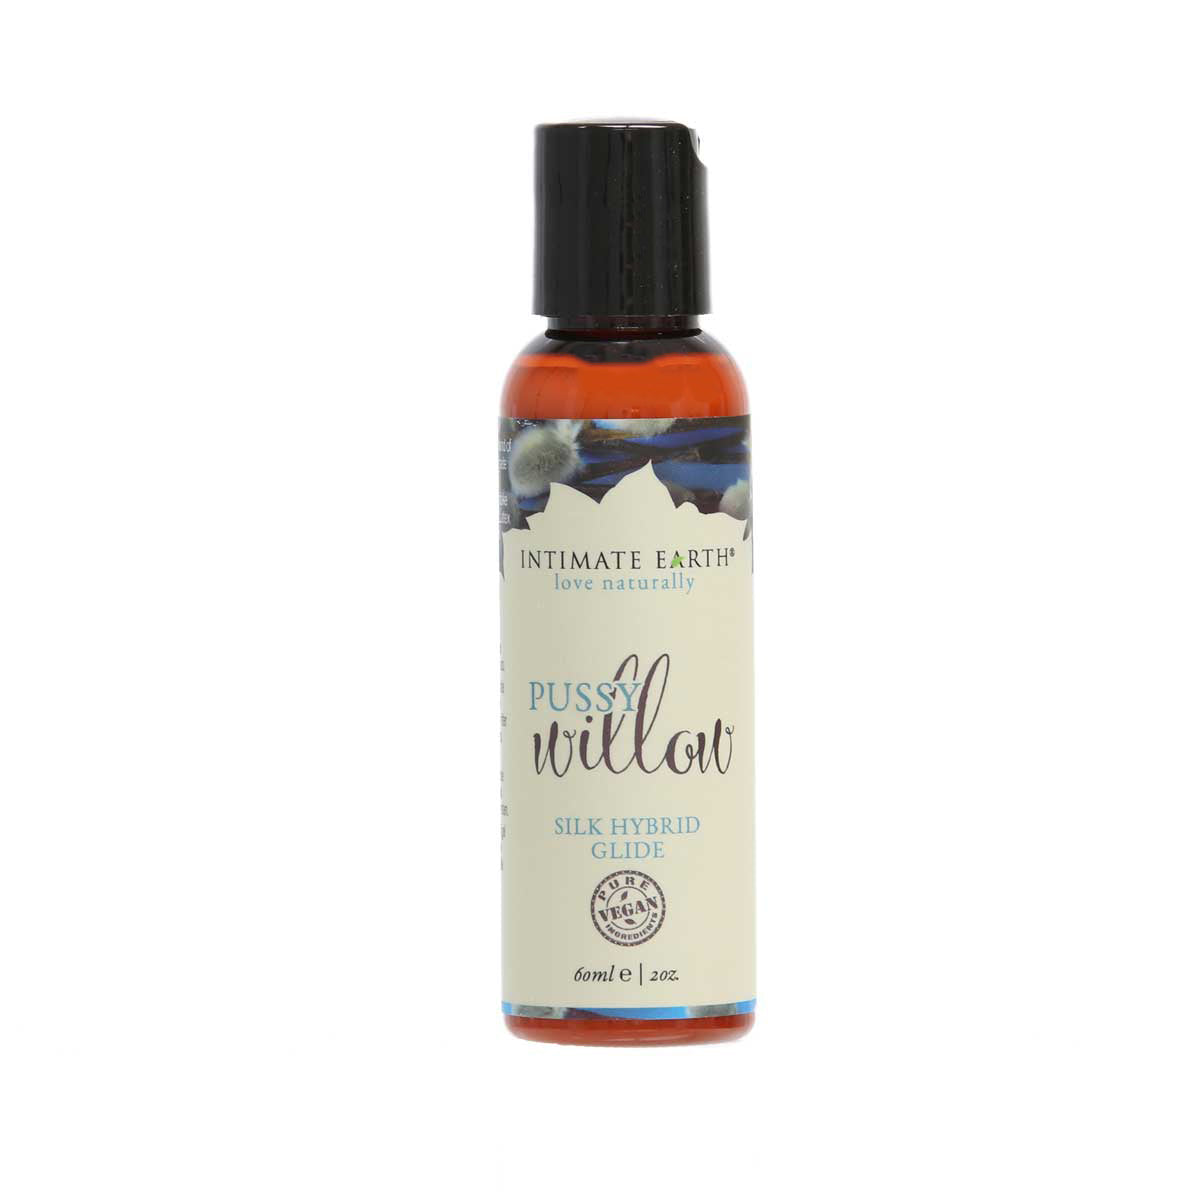 Intimate Earth - Pussy Willow Silk Hybrid Glide - 2 oz